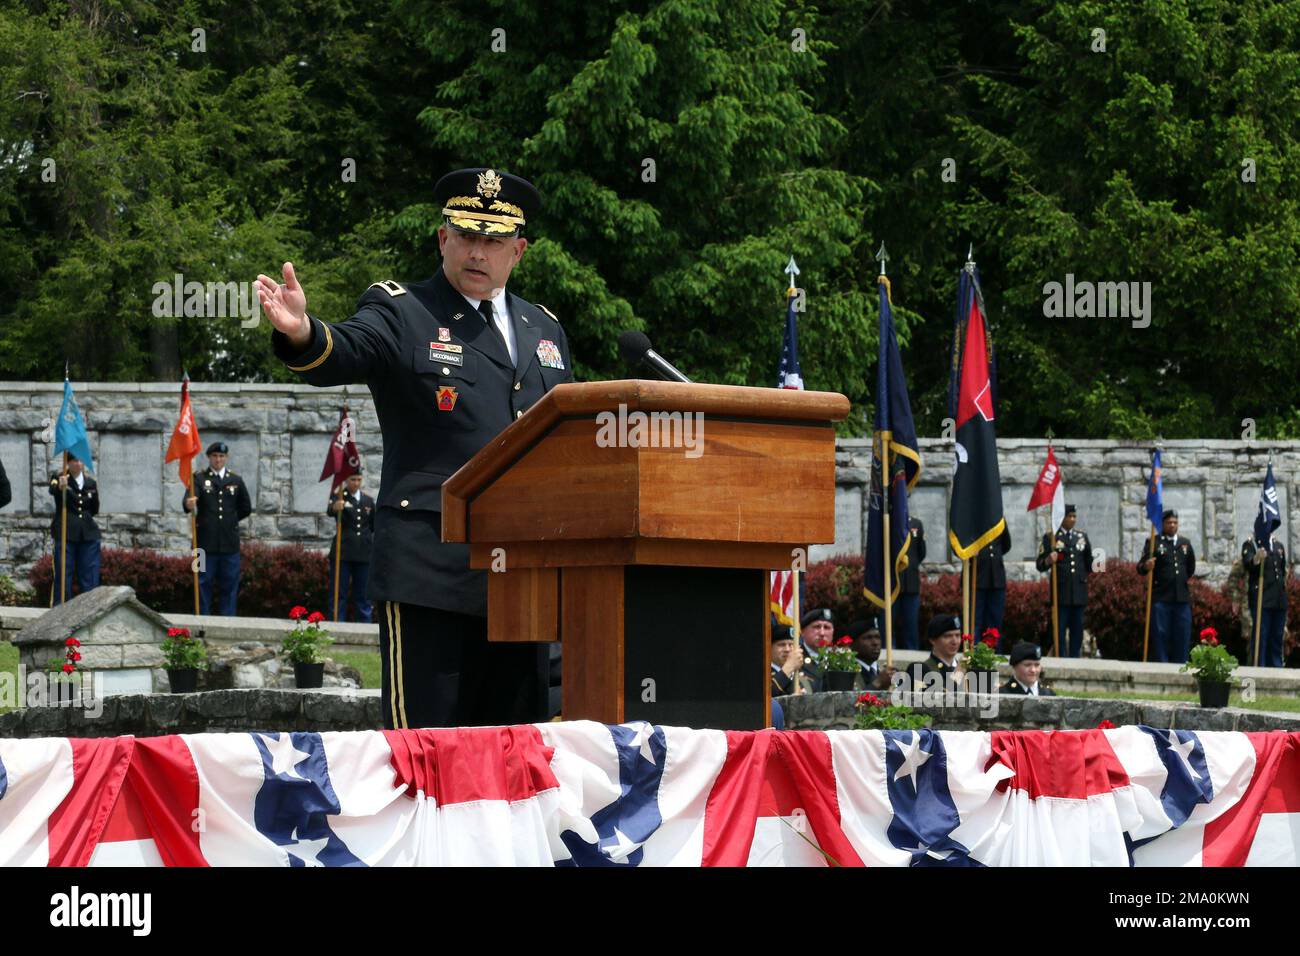 Maj. Gen. Mark McCormack, 28th Infantry Division commander, notes the addition of a Battle of the Bulge monument to the division shrine during the unit's annual memorial service at Boalsburg, Pa. May 22, 2022. The 2022 memorial service marked the return of the colorful ceremony to the grounds along Spring Creek after the coronavirus pandemic canceled the event in 2020 and forced a scaled-down ceremony in 2021. U.S. Army photo by Master Sgt. Doug Roles Stock Photo